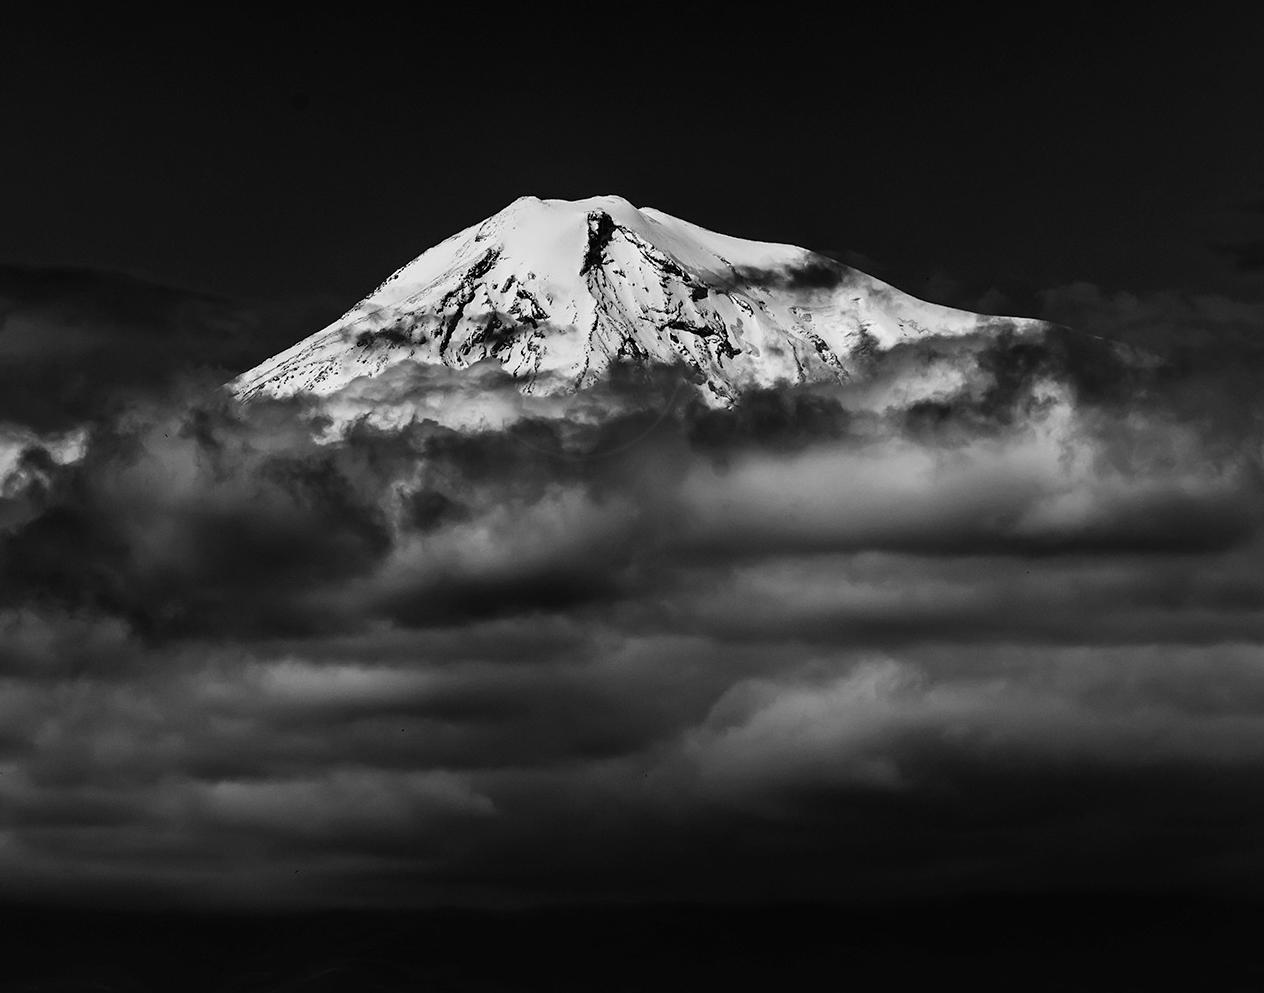 The summit of Mt. Ararat, the ancient symbol of everything Armenian, peeks above the clouds that had enshrouded it from view, if only momentarily... 

Edition 1 of 5. Photograph printed on canvas, signed by artist lower right. 

Vahé Peroomian is a